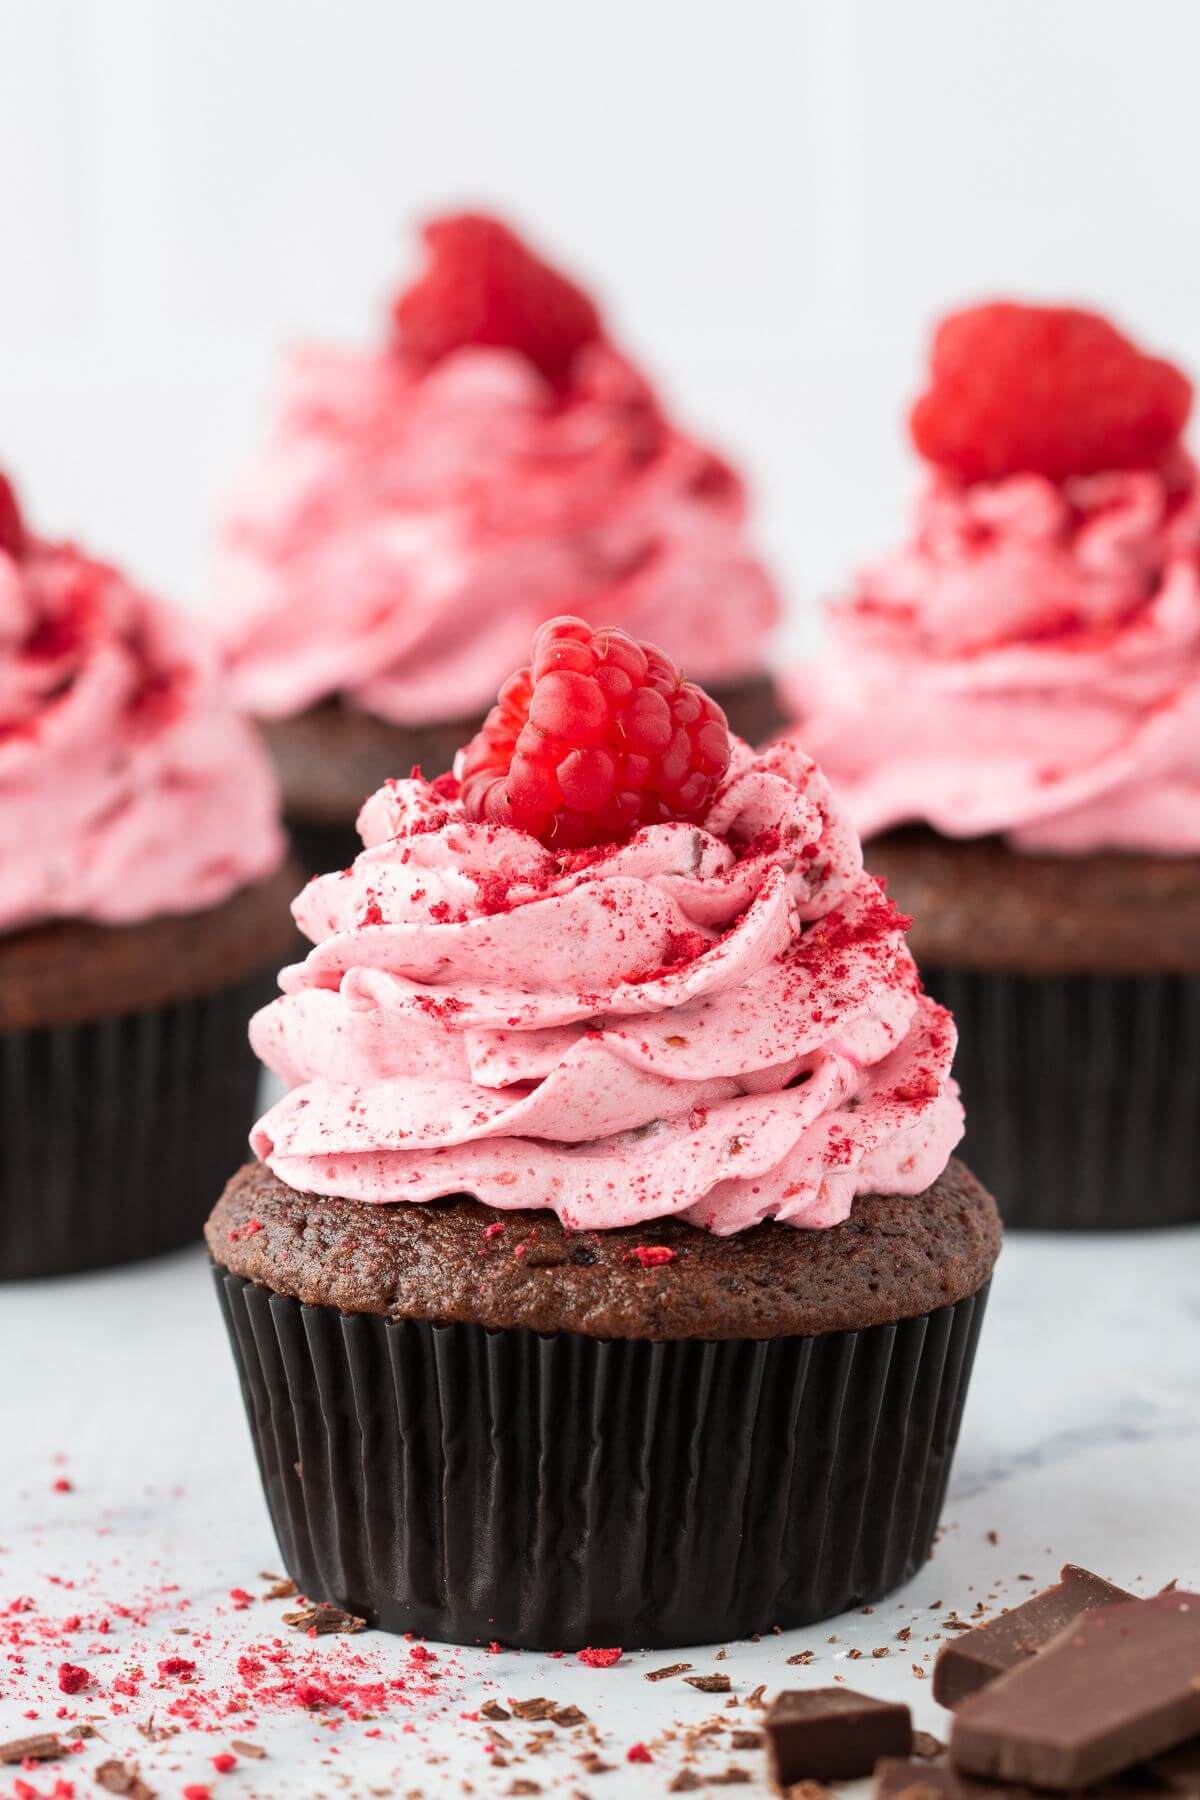 Four pink frosted cupcakes sit on table scattered with red sprinkles and chocolate chunks.